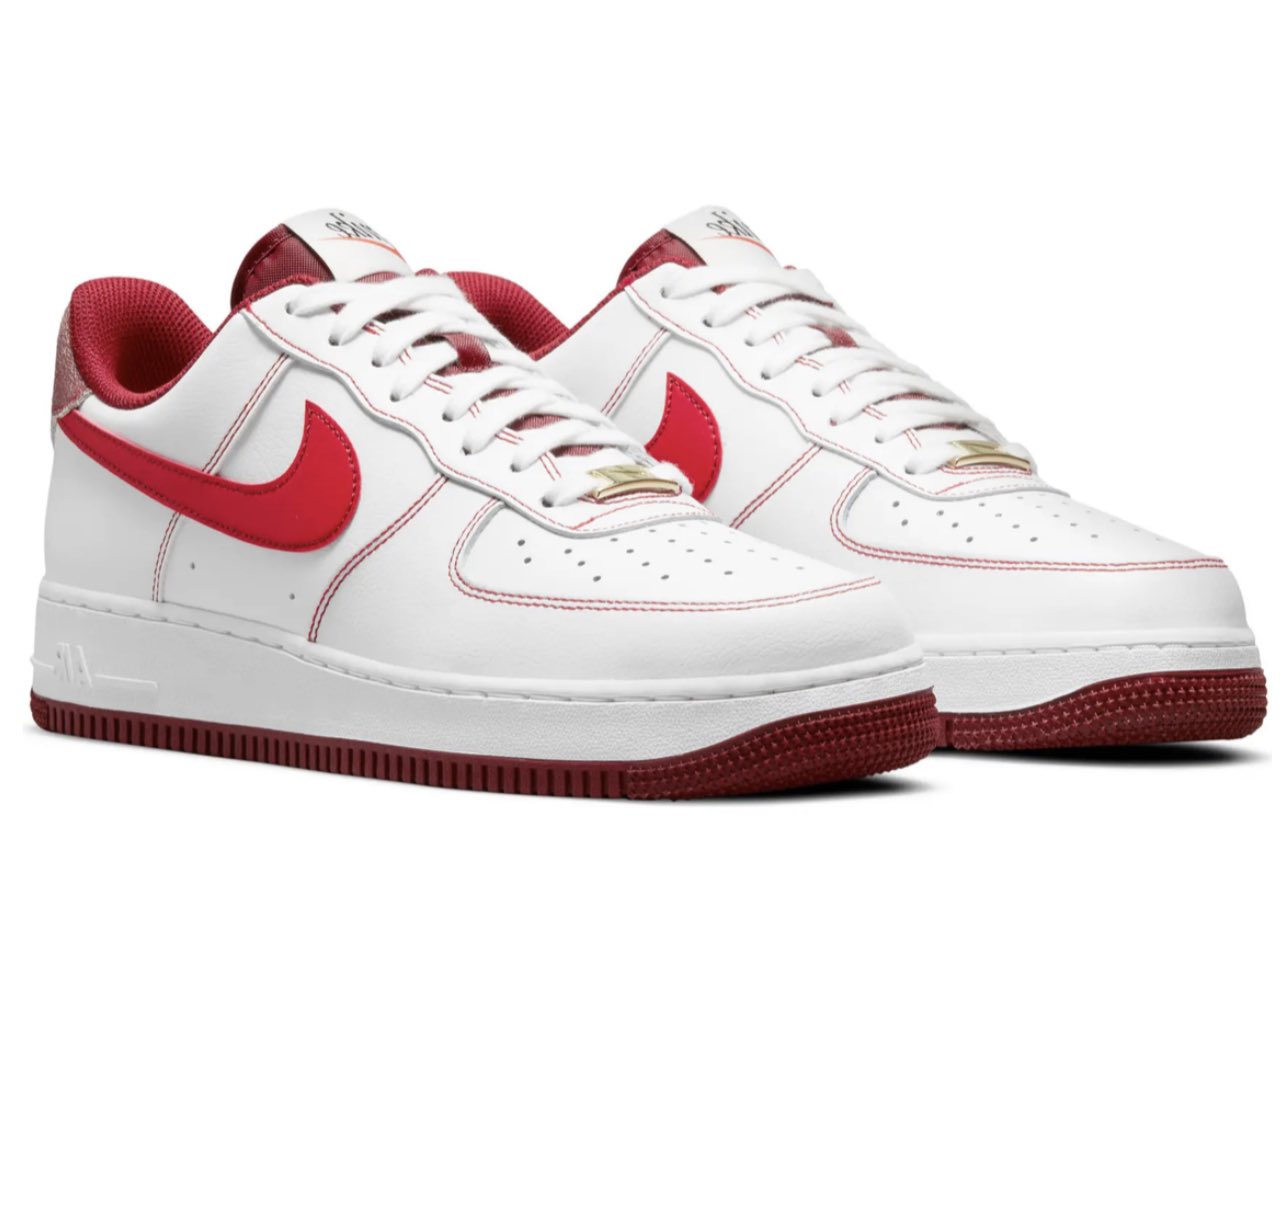 SNKR_TWITR on X: Nike Air Force 1 '07 First Use 'White/University Red' in  a few sizes via Nordstrom  #AD   / X